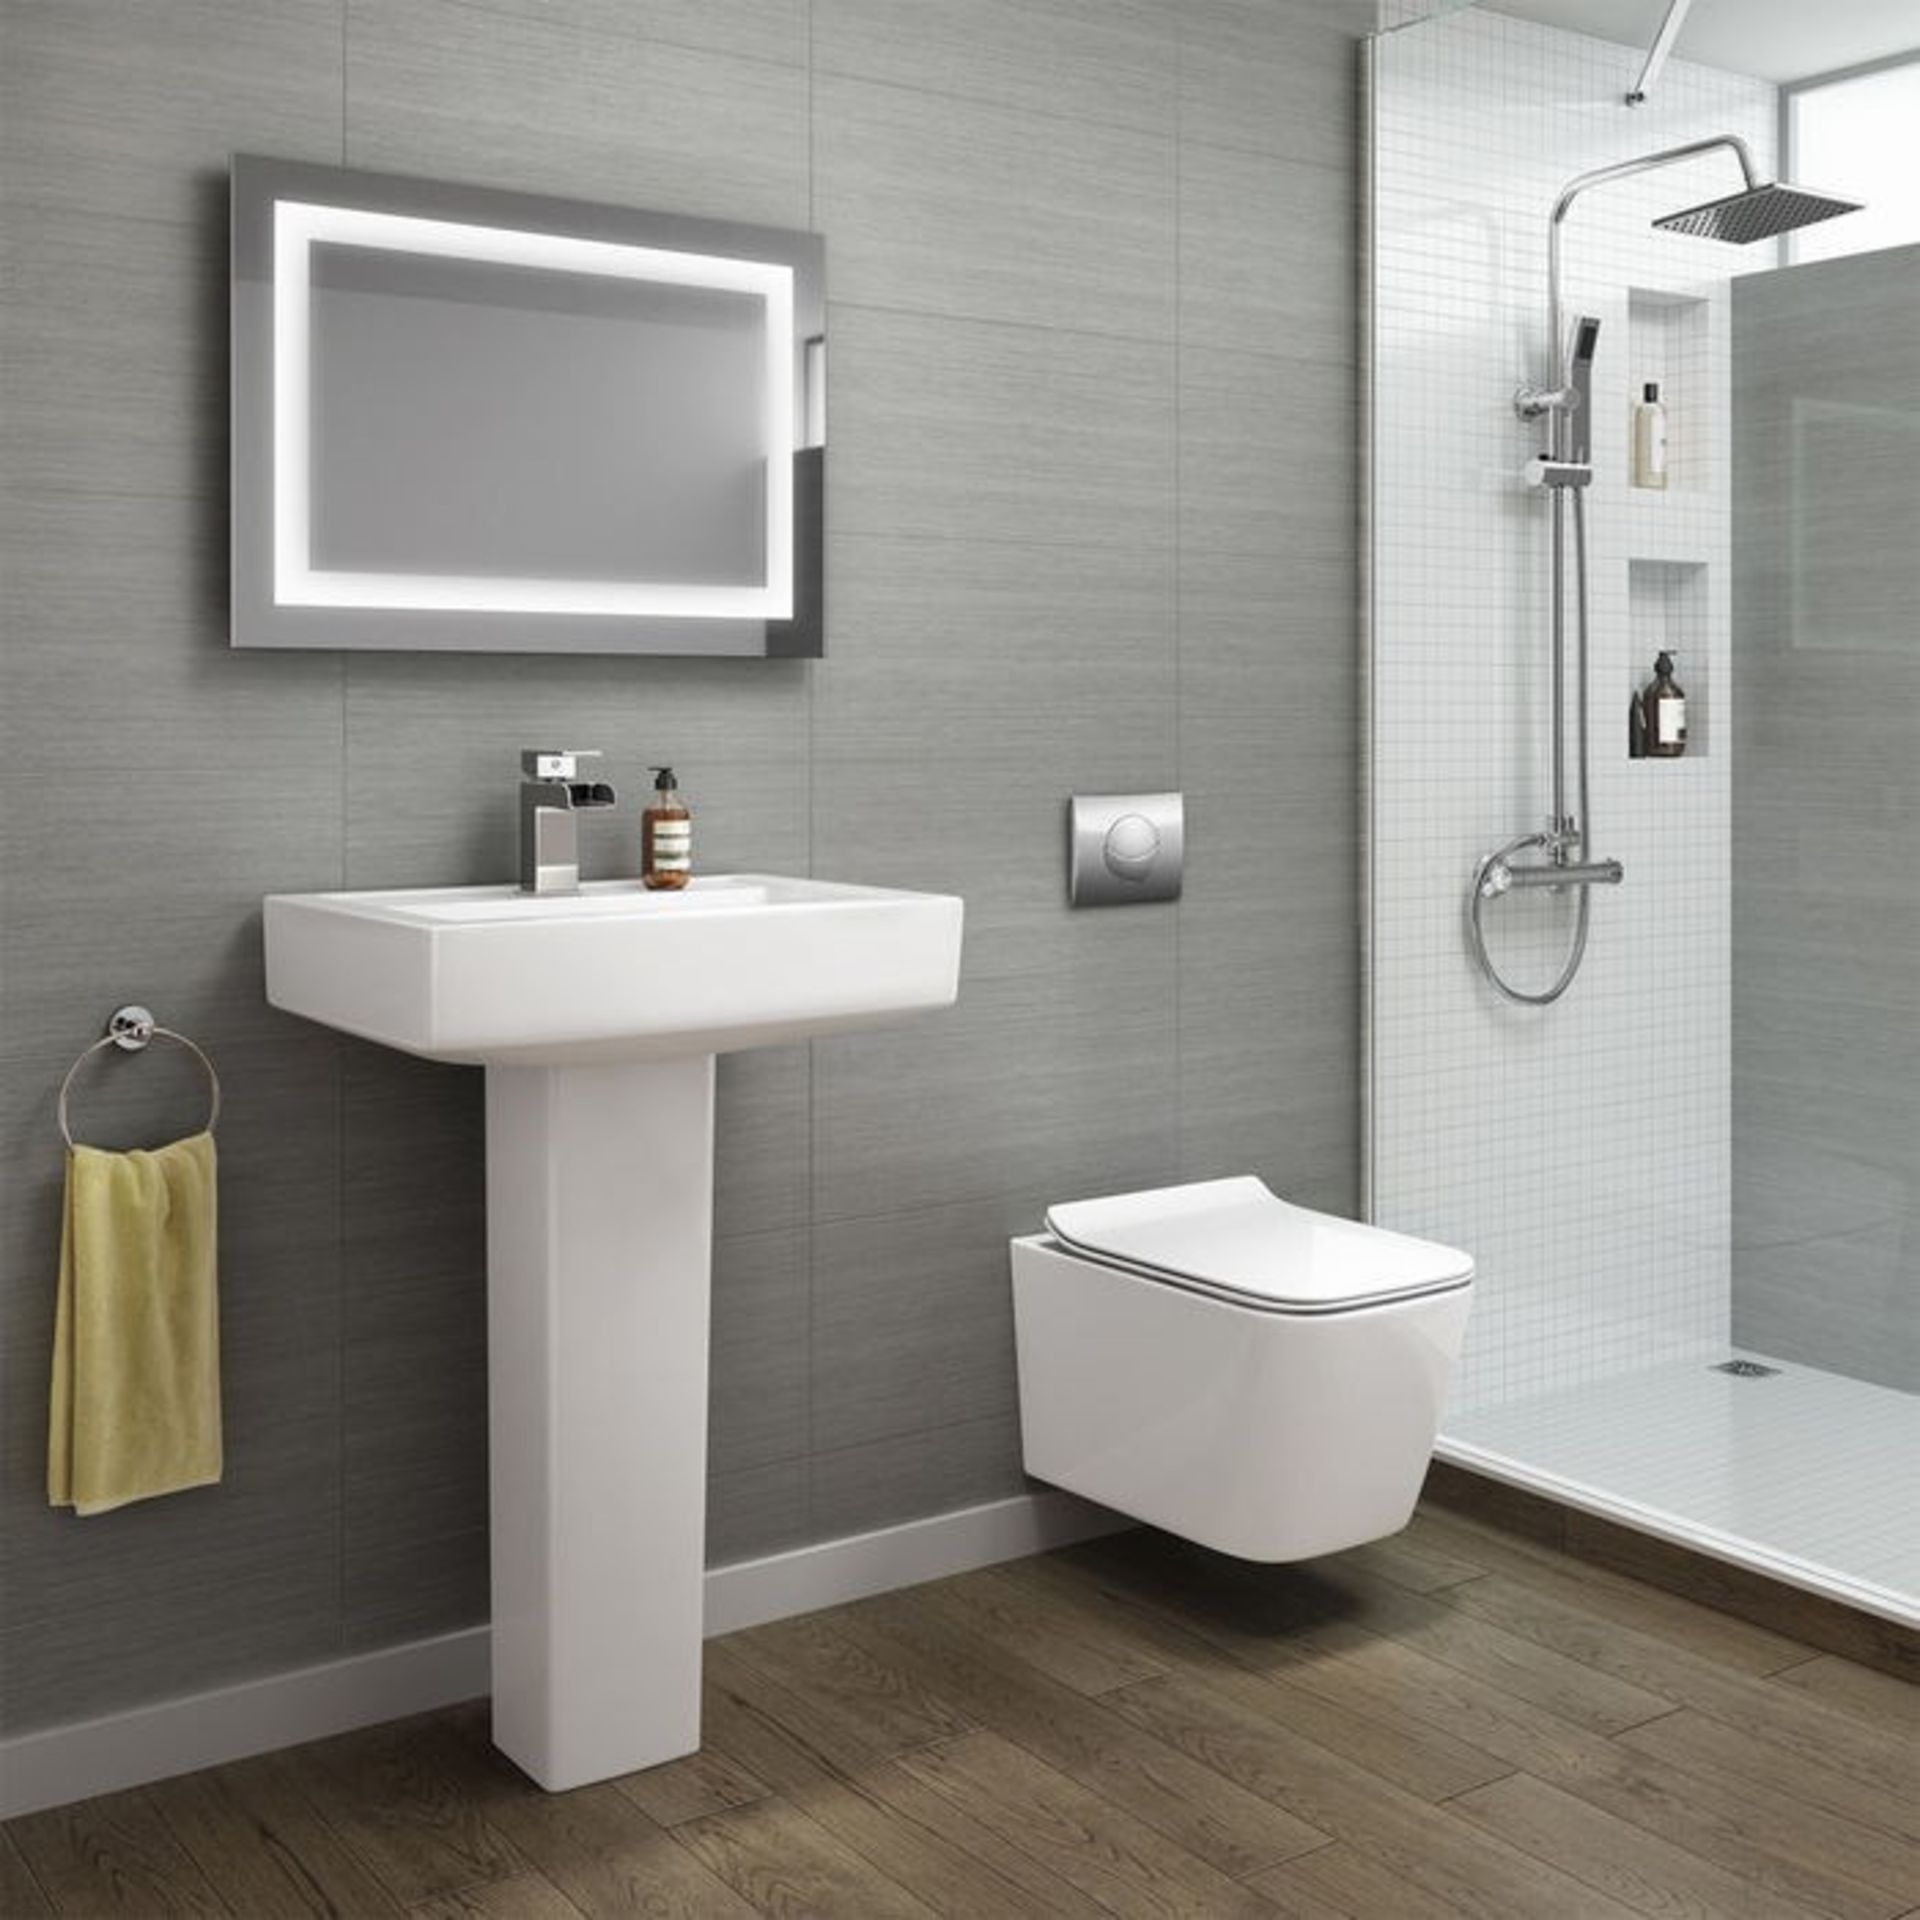 Florence Wall Hung Toilet inc Luxury Soft Close Seat. RRP £349.99 each.Made from White Vitre... - Image 2 of 3